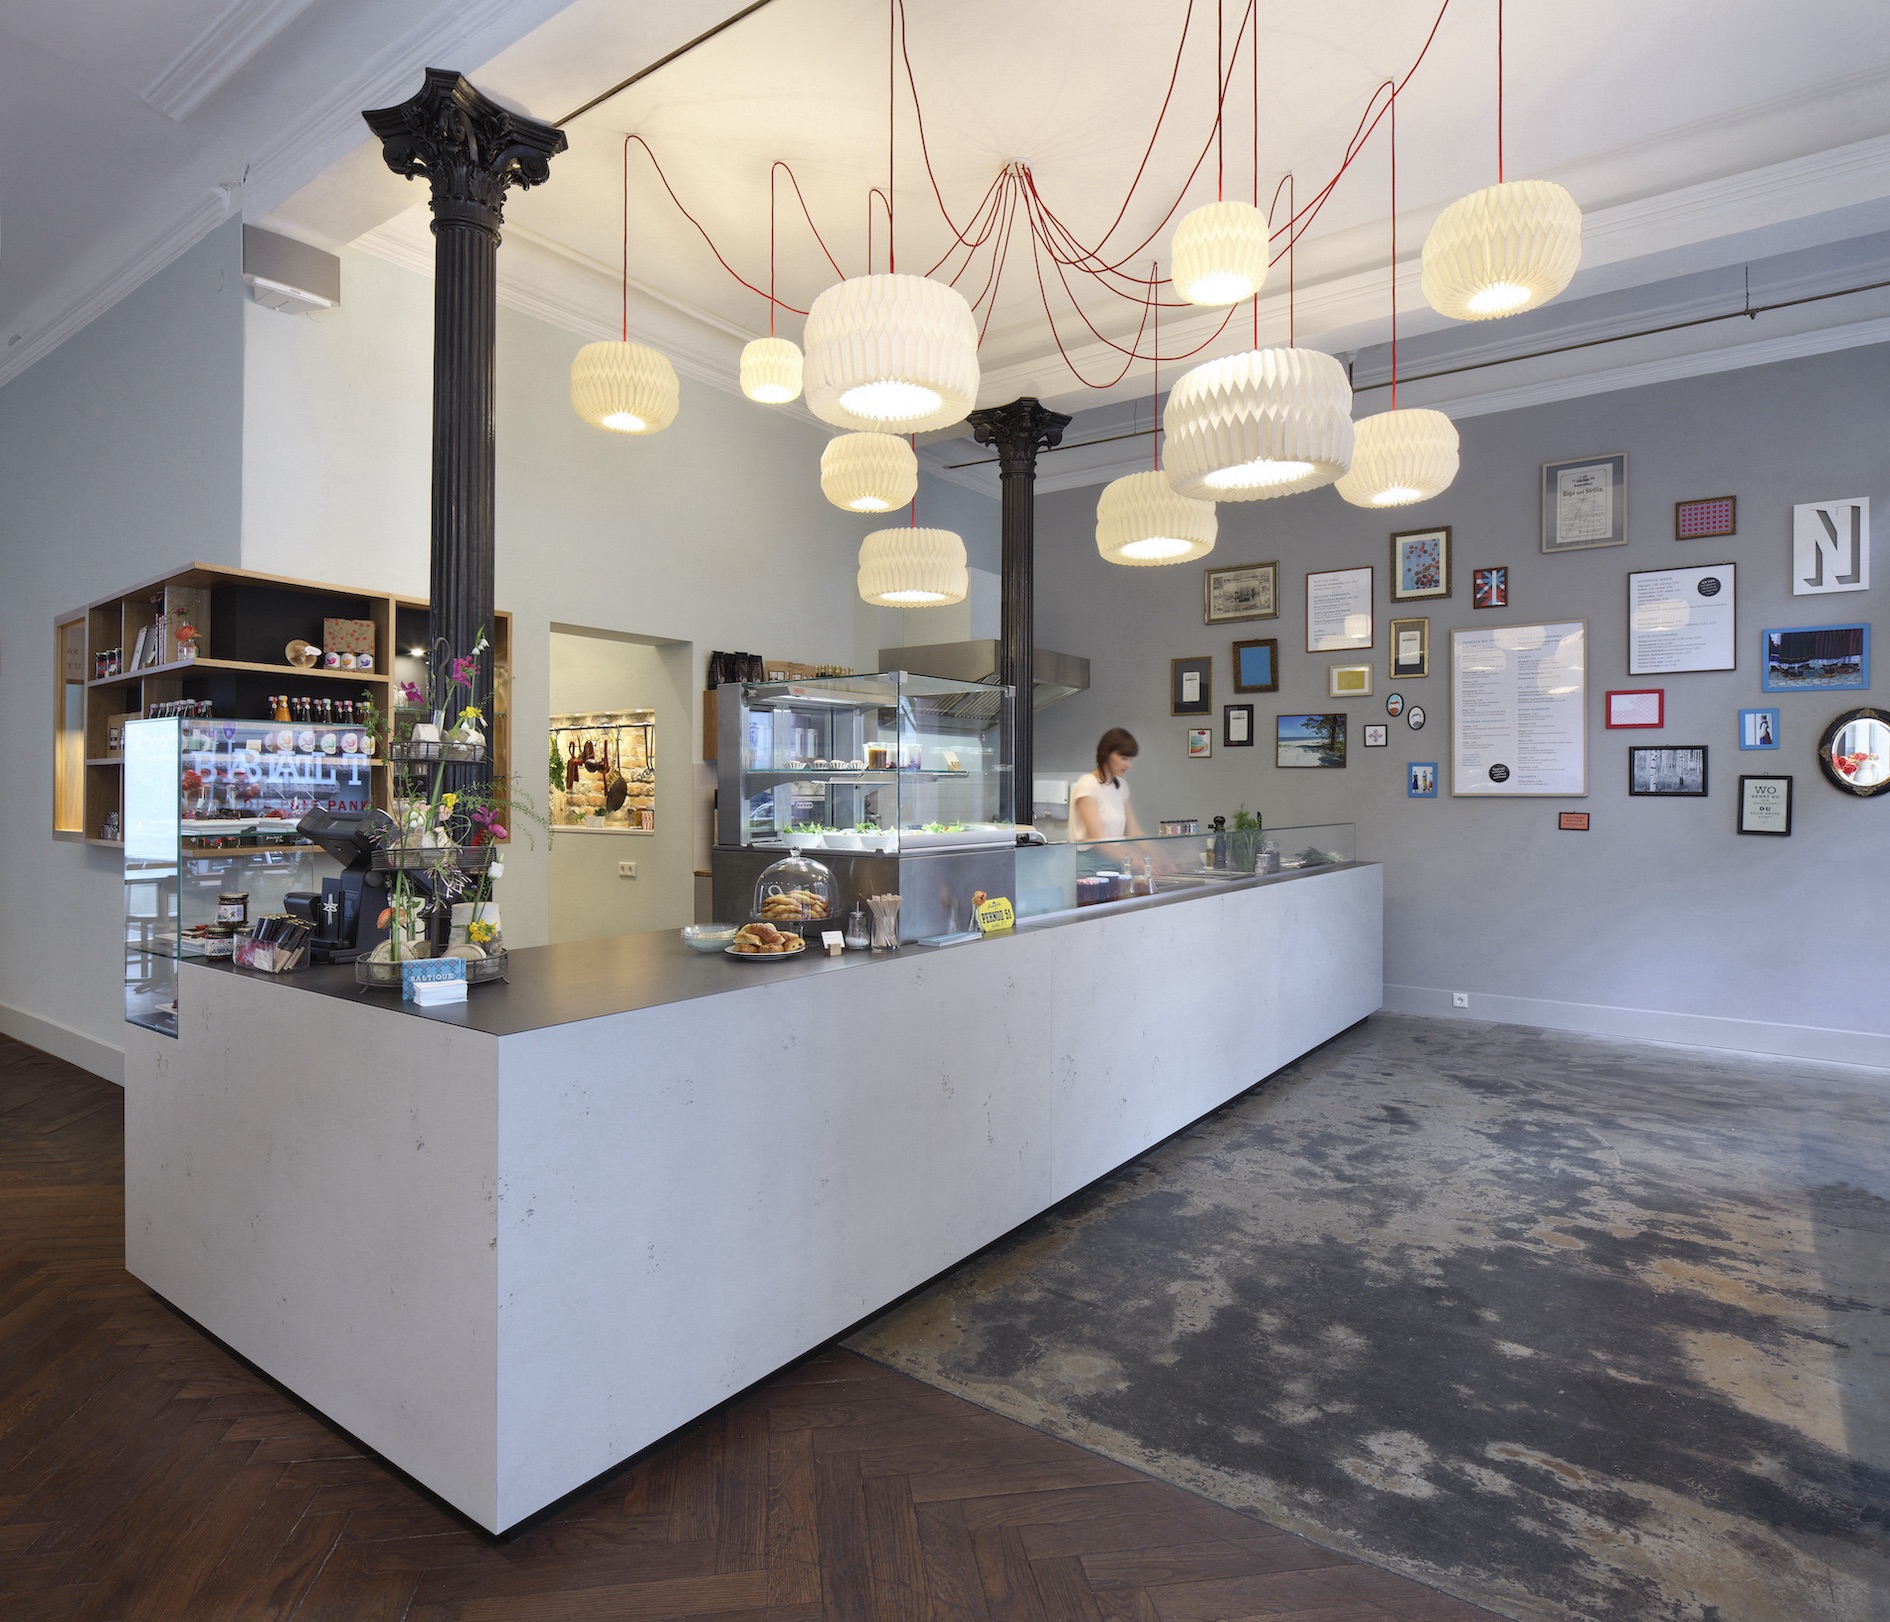 Interior Fit-Out for Baltique, a Deli Pankúka Bar in Frankfurt's City Center